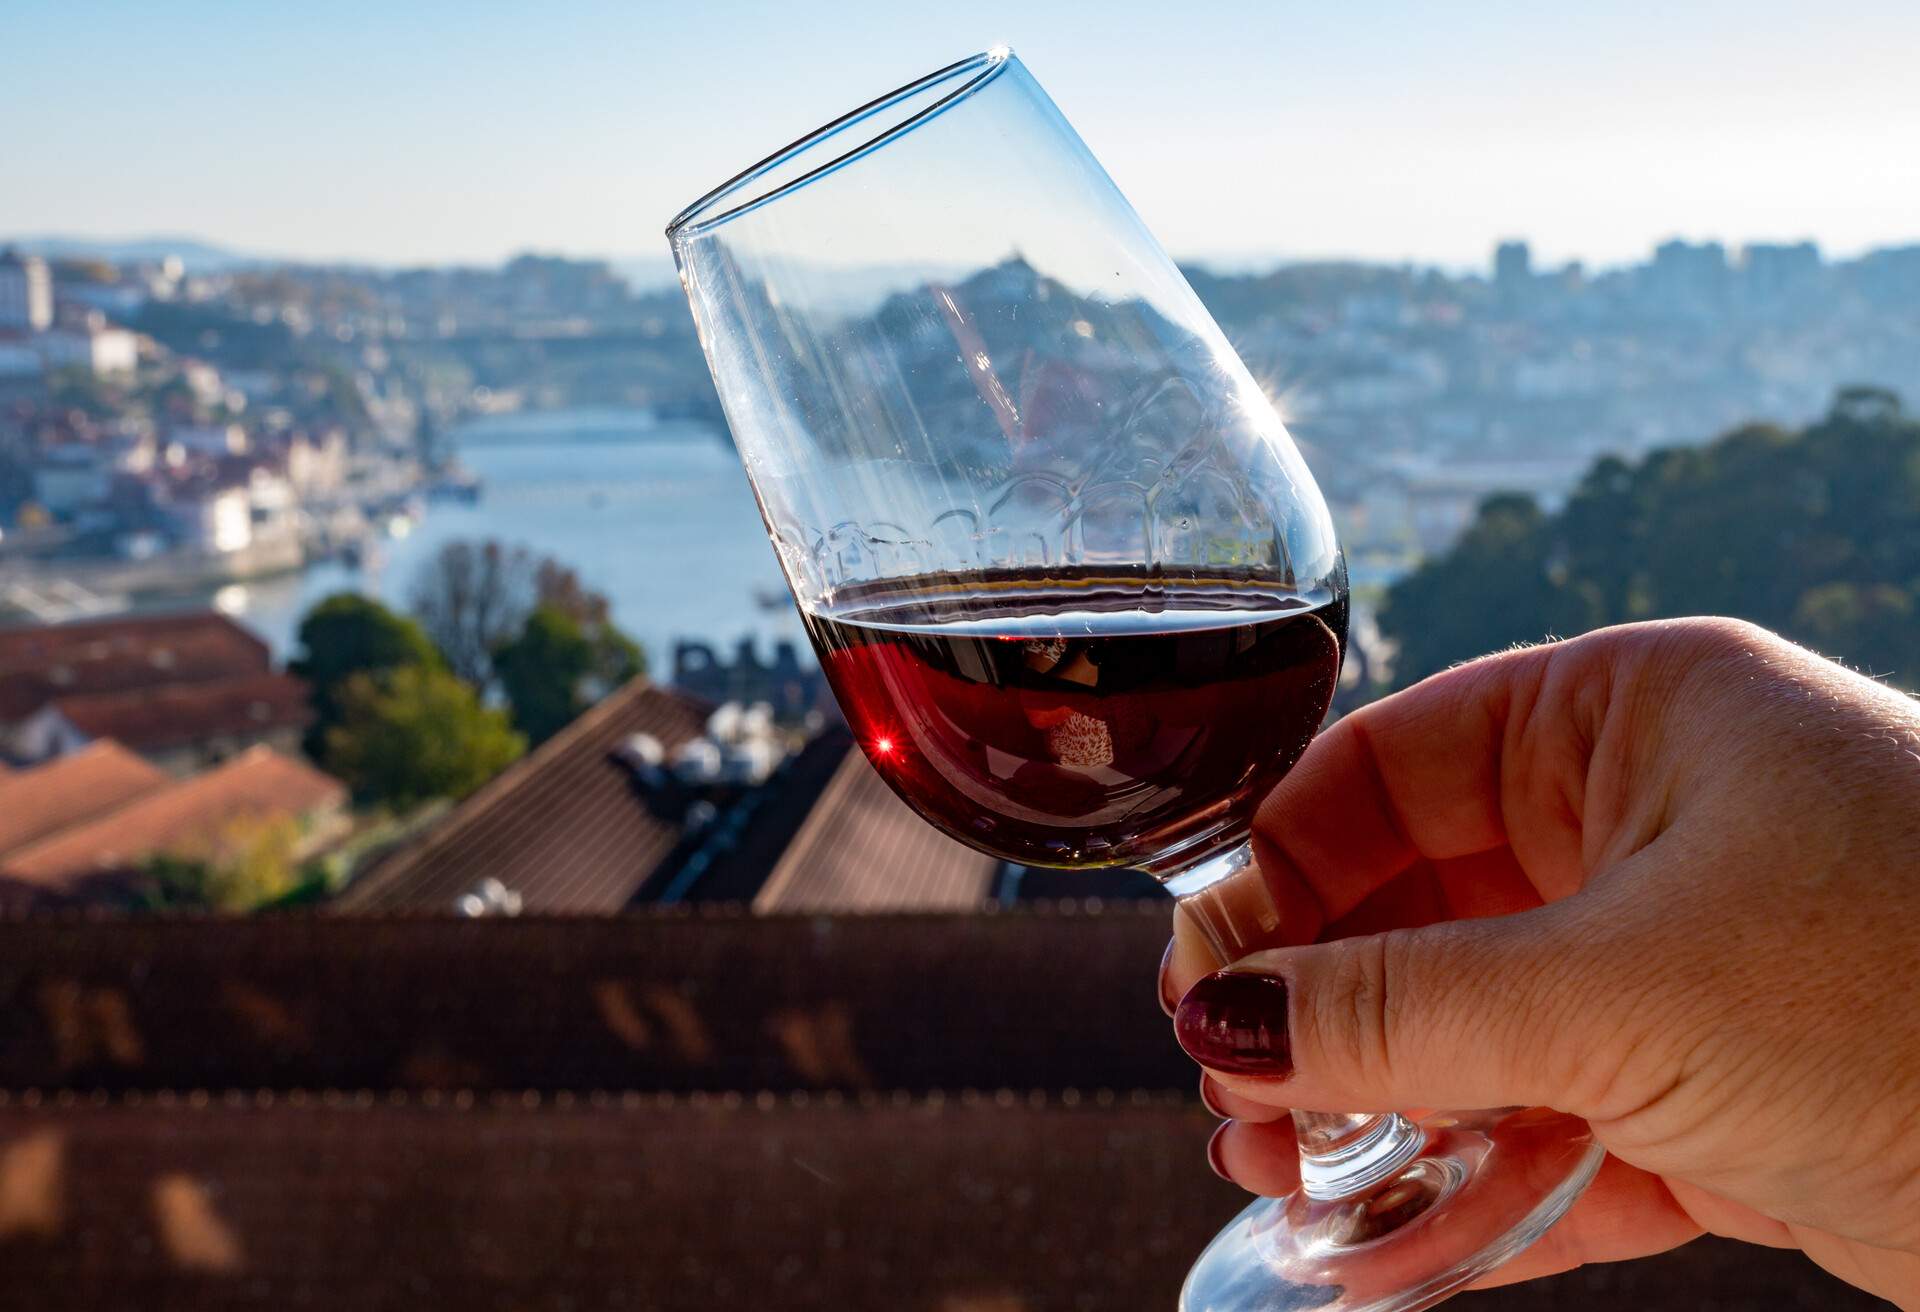 Tasting of different fortified dessert ruby, tawny port wines in glasses with view on Douro river, porto lodges of Vila Nova de Gaia and city of Porto, Portugal, close up